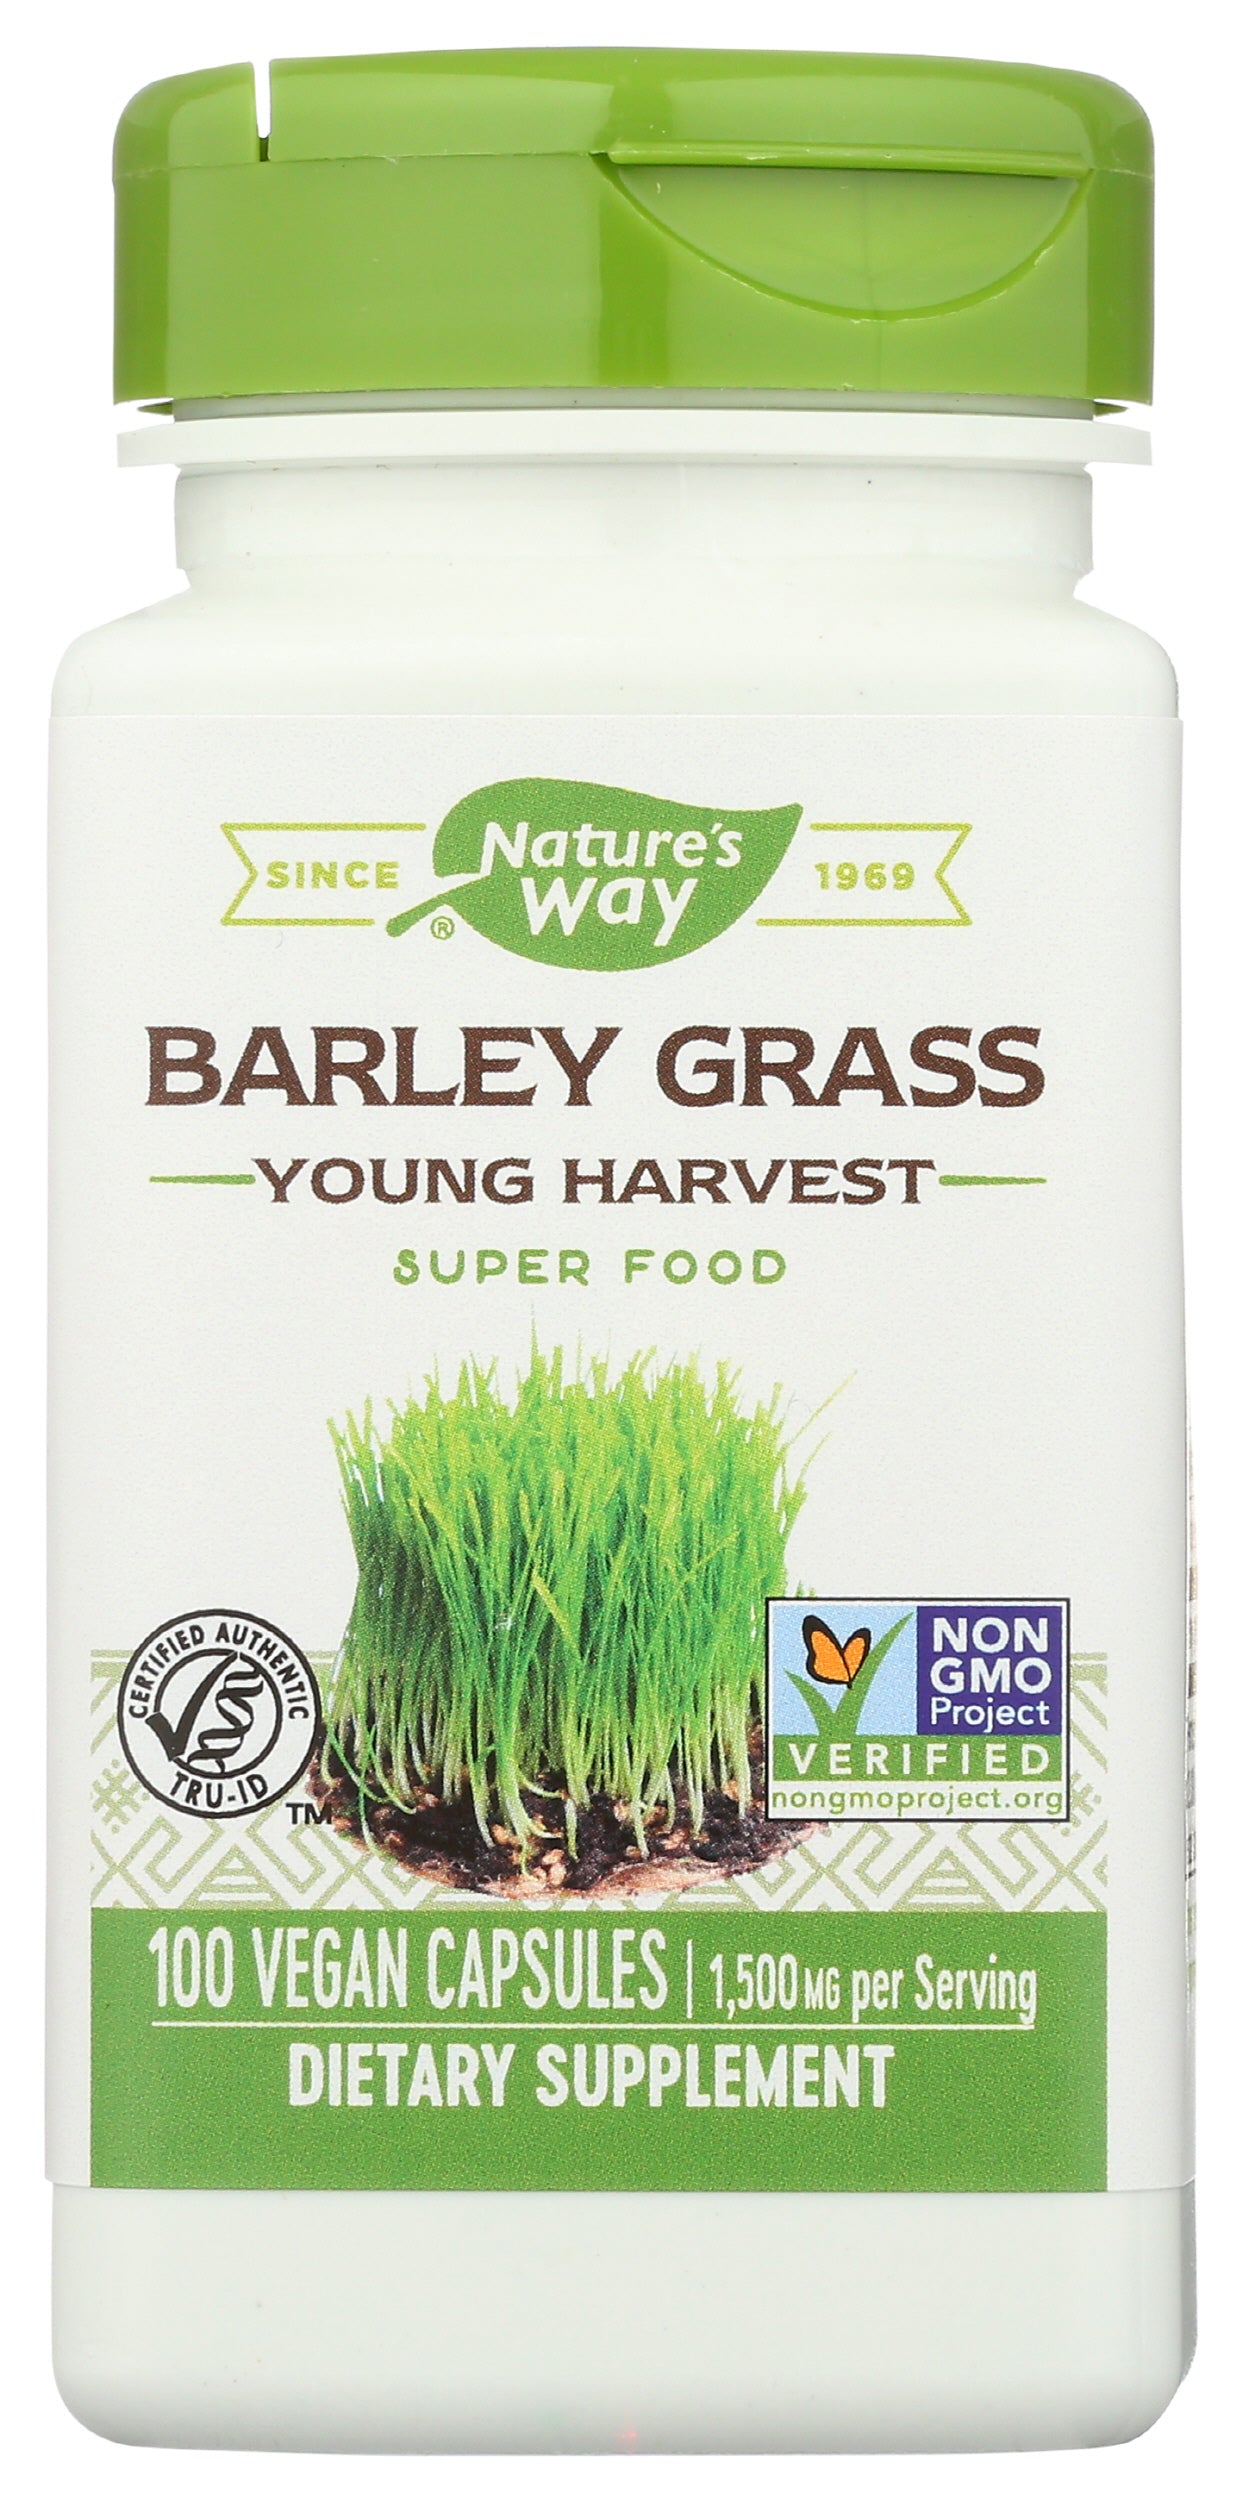 Nature's Way Barley Grass 1,500mg 100 Vegan Capsules Front of Bottle